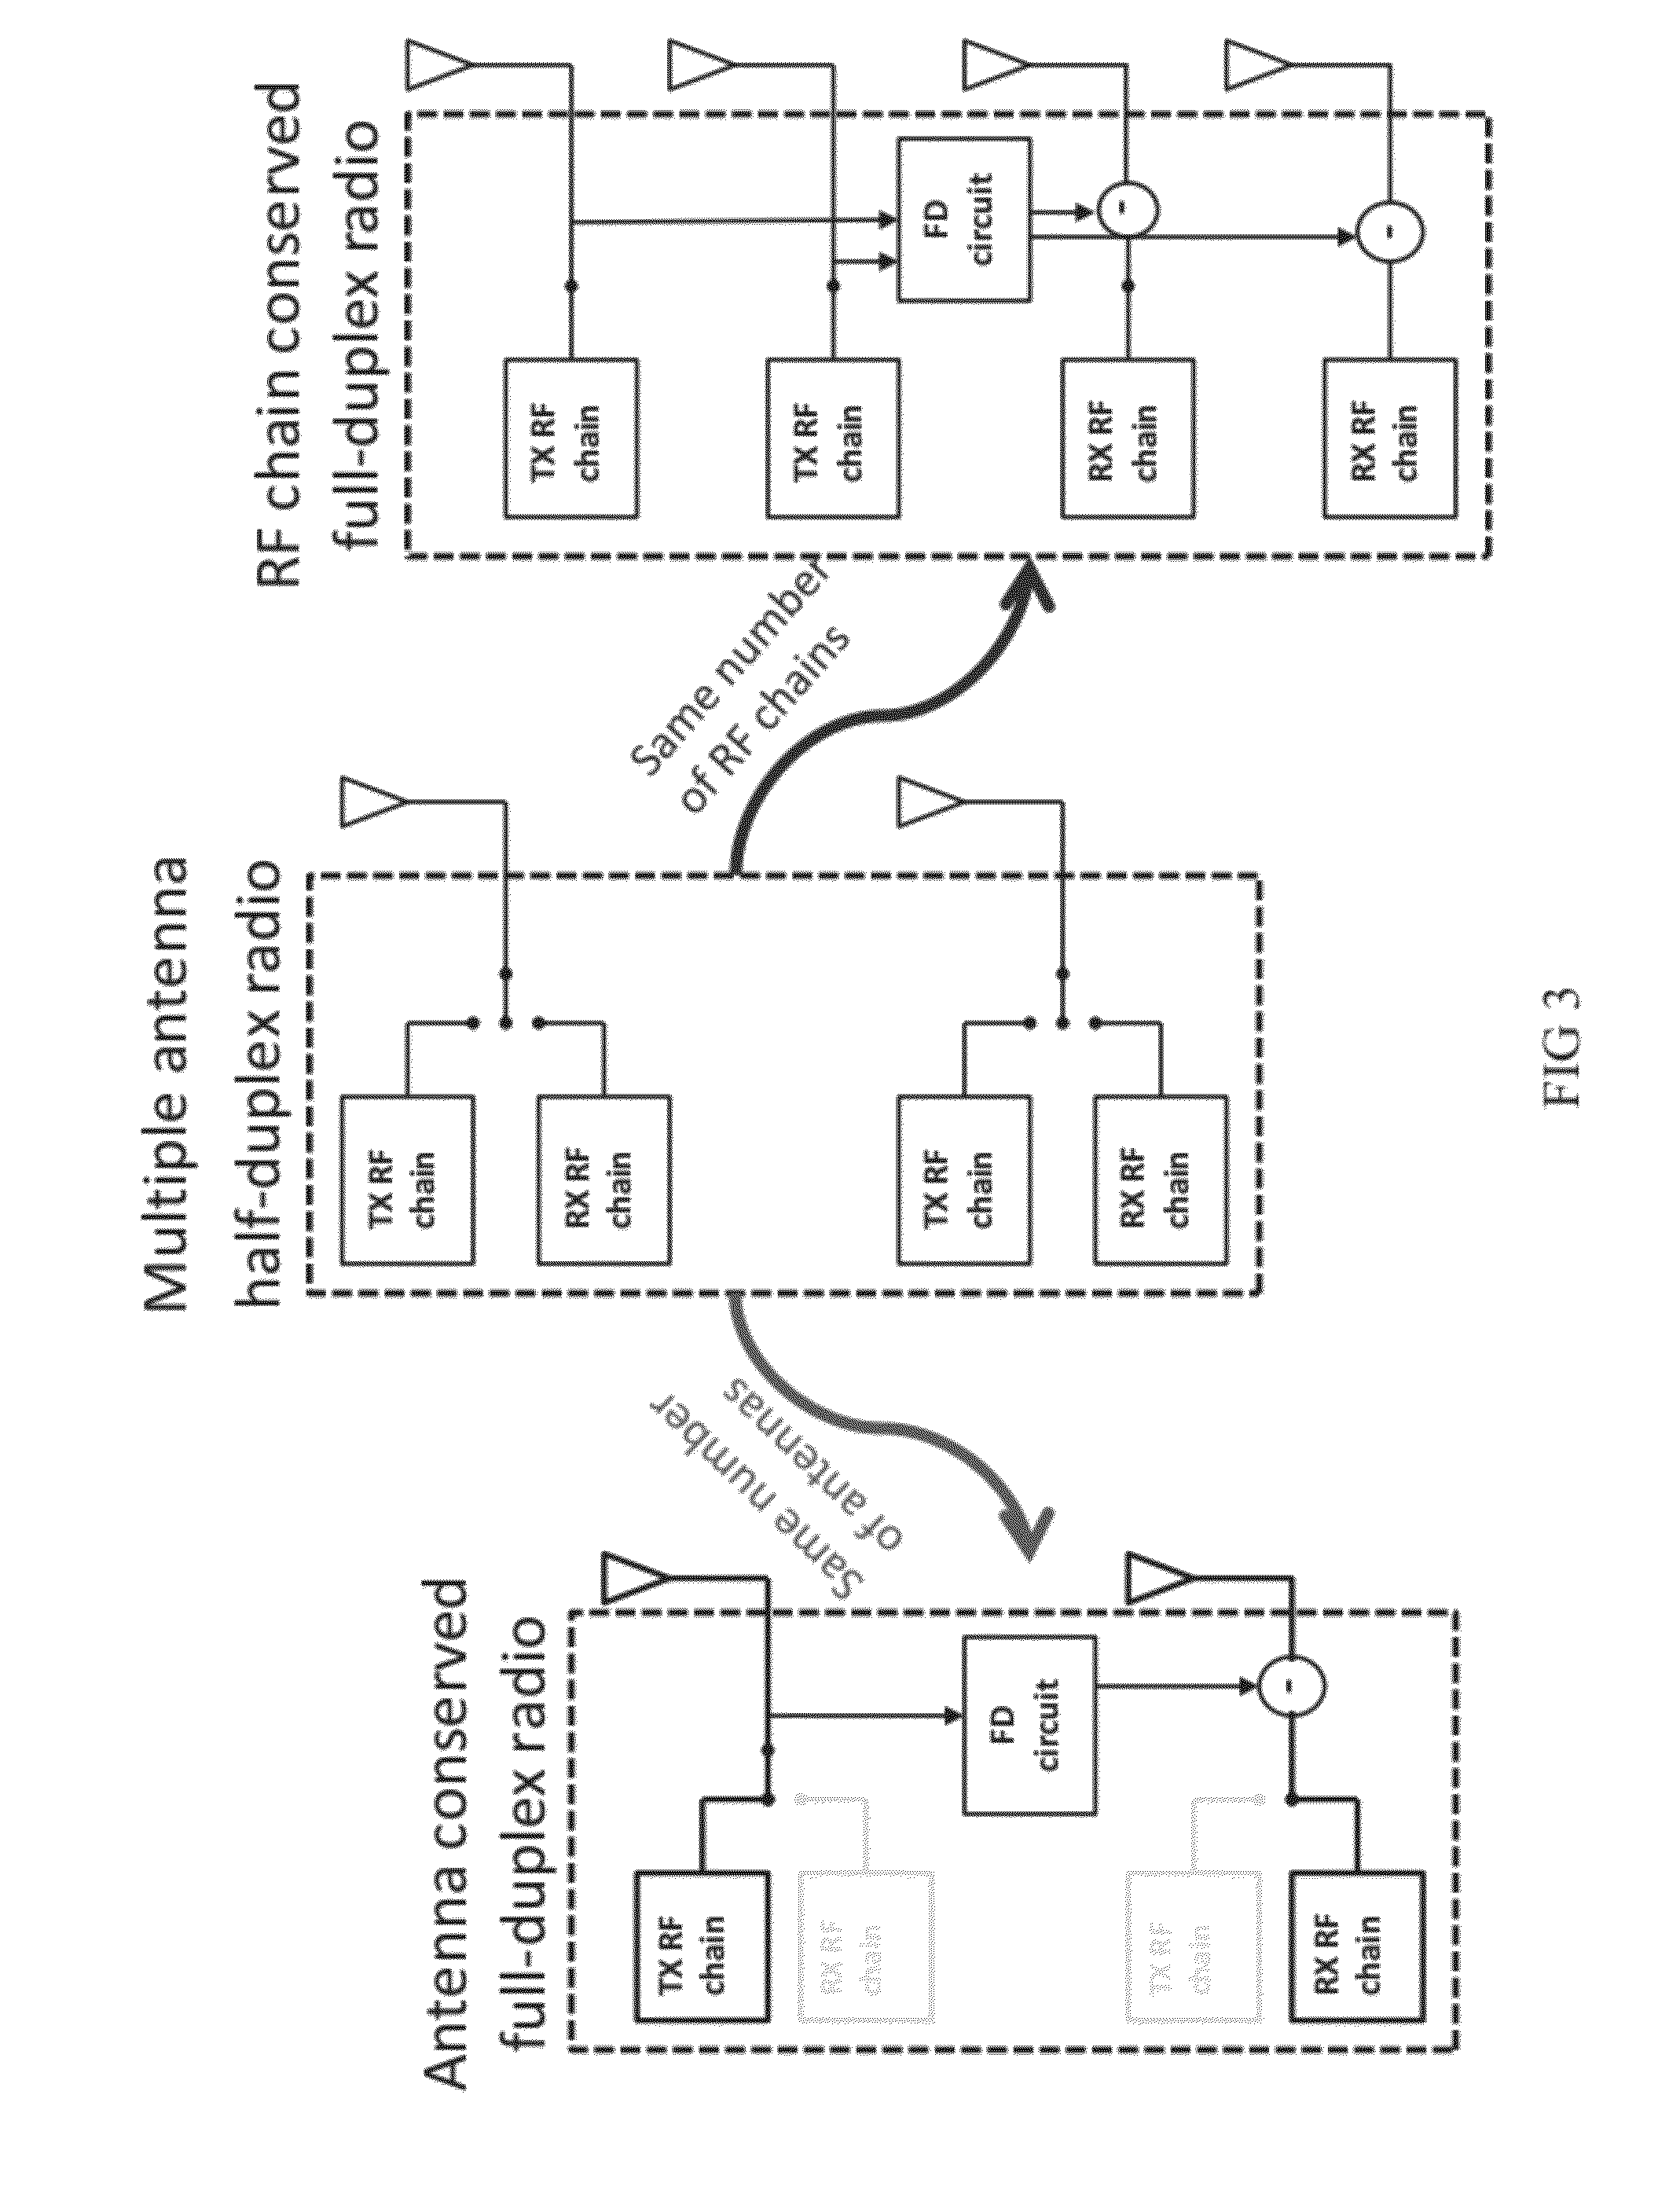 Method For A canceling Self Interference Signal Using Passive Noise Cancellation For Full-Duplex Simultaneous (in Time) and Overlapping (In Space) Wireless transmission and Reception On The Same Frequency Band